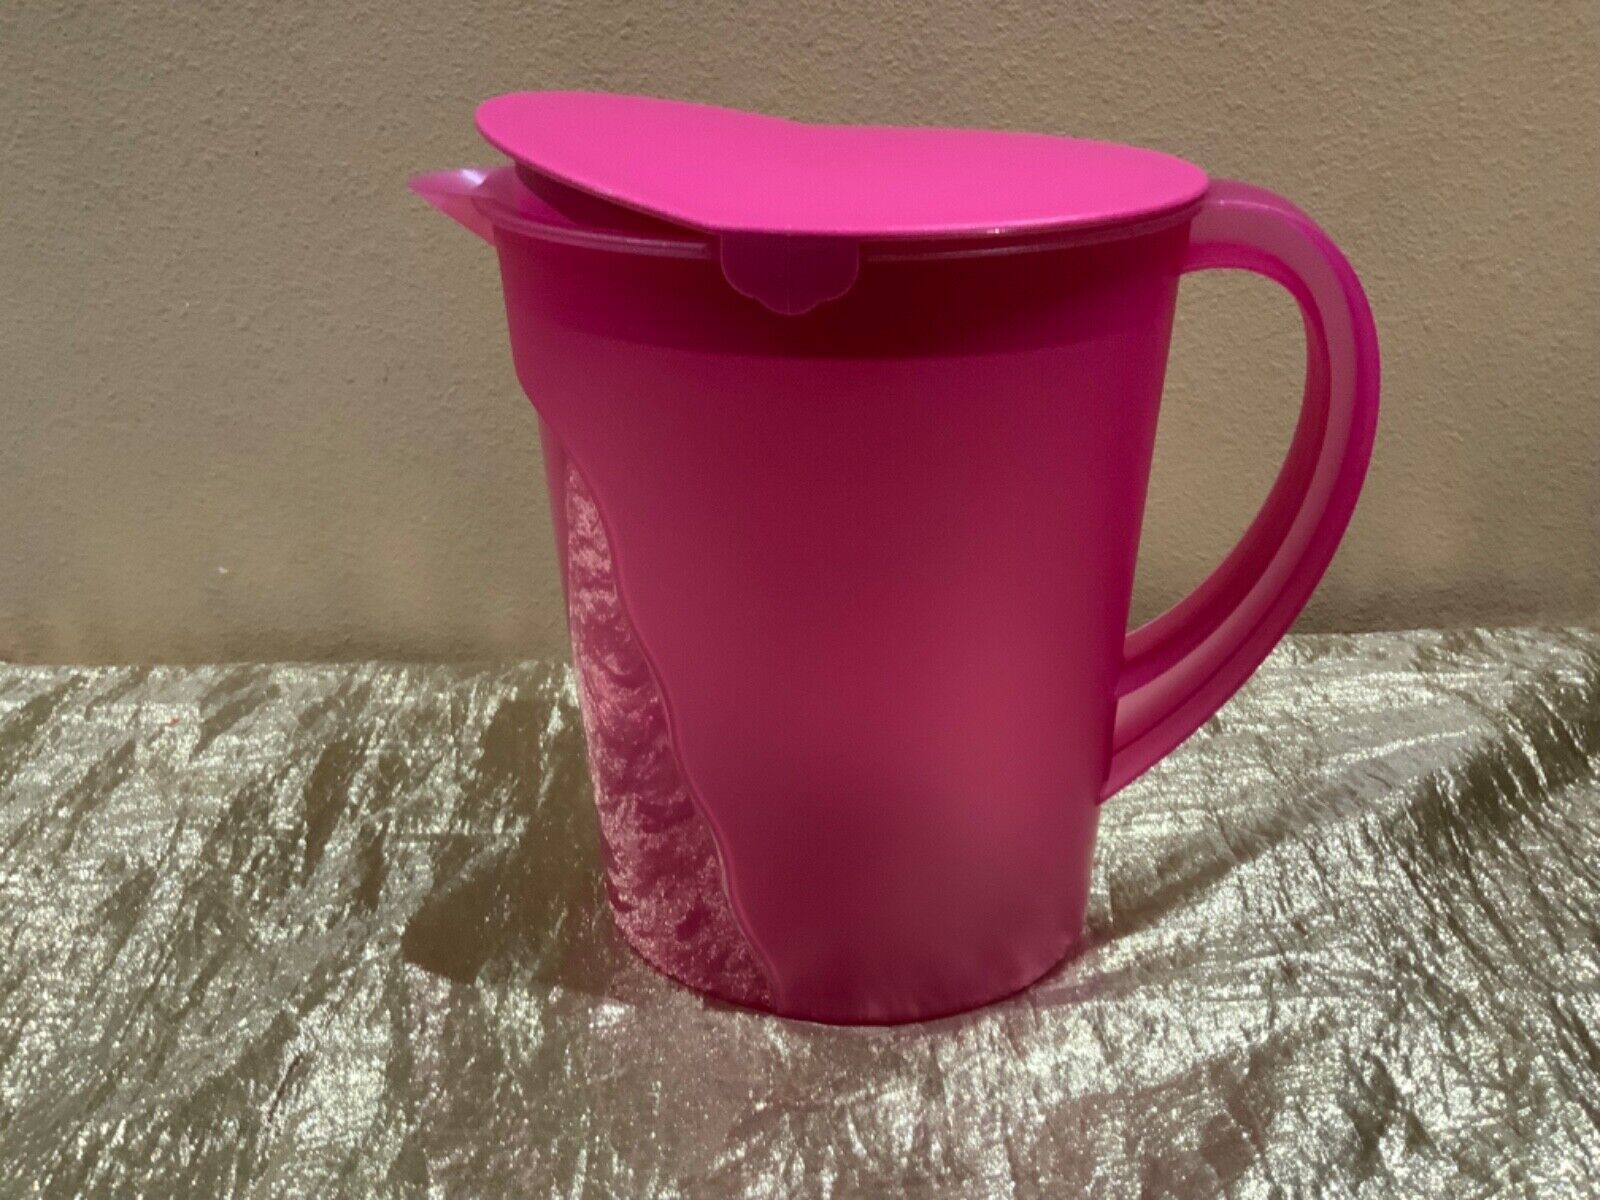 New Tupperware Beautiful Jumbo Expression Pitcher 1 Gallon 3.7L in Fiusha Color